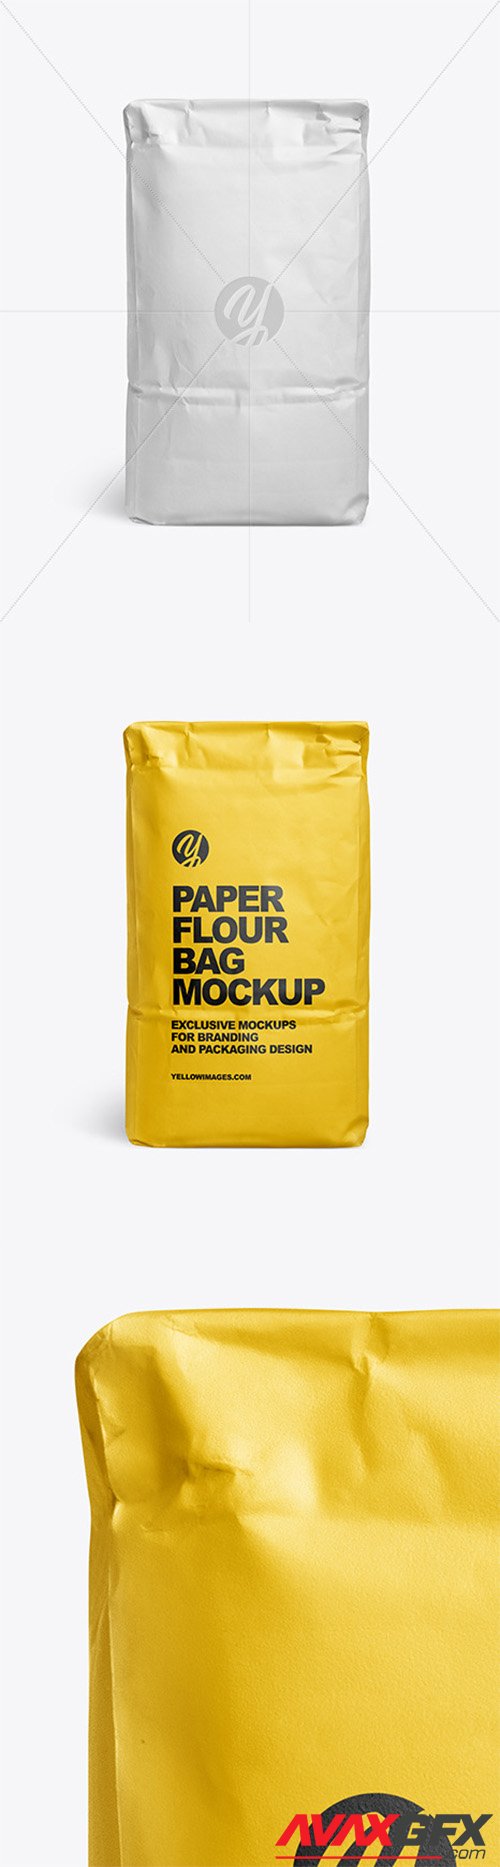 Download Paper Flour Bag Mockup - Front View 61238 » AVAXGFX - All ...